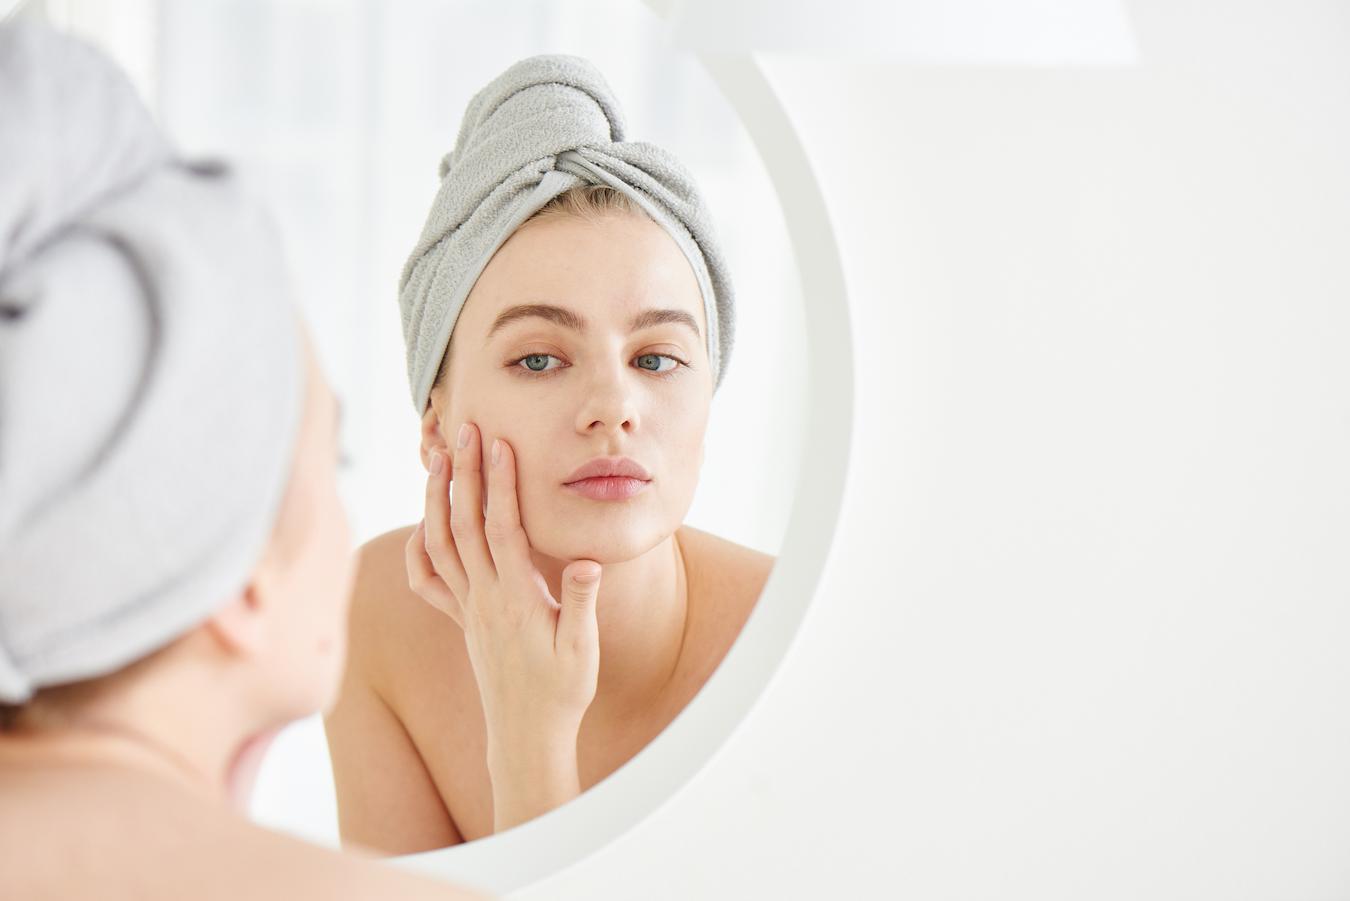 Get acquainted with glycolic acid and other humectants that exfoliate and hydrate at the same time